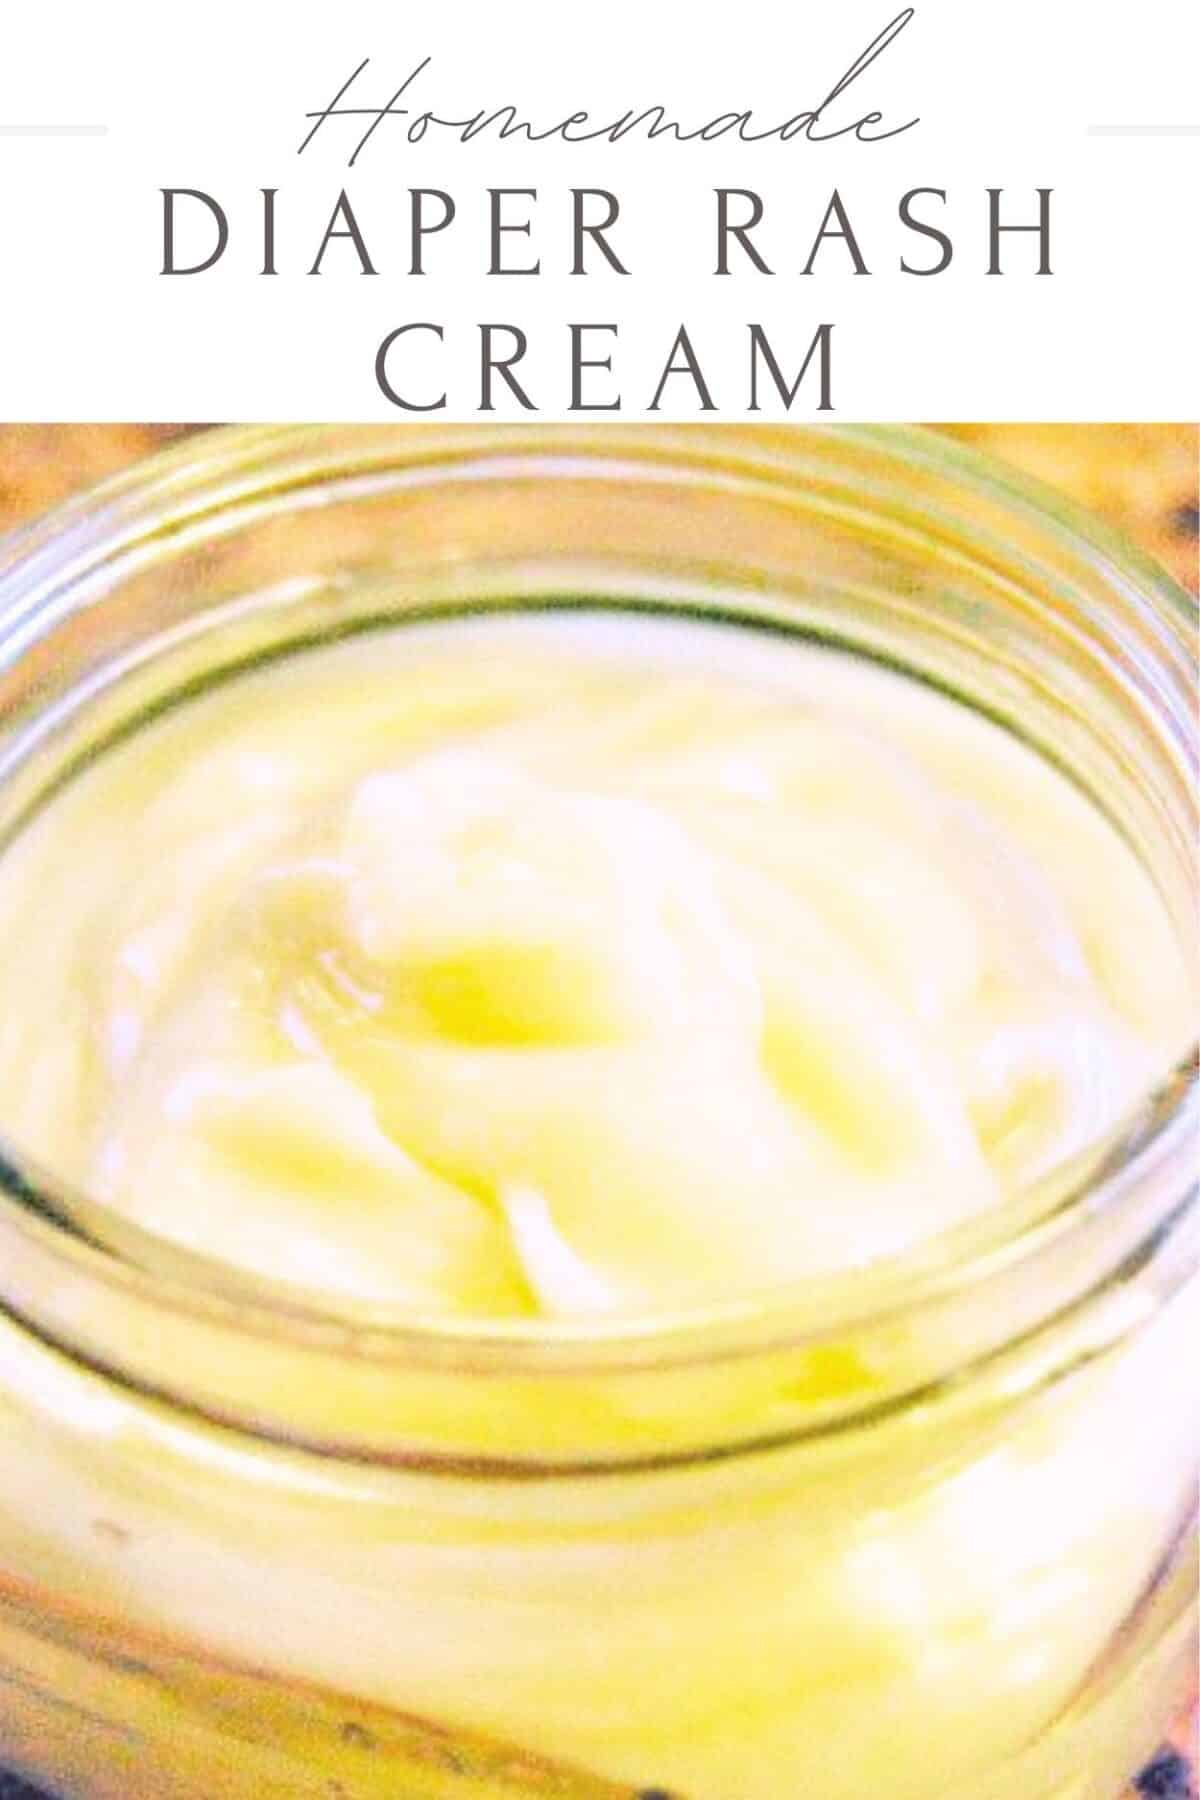 This easy DIY diaper rash cream soothes and heals tender skin using just 4 basic ingredients. The natural ingredients whisk together in minutes to create a soothing protective barrier that works better than pricey storebought creams, with no nasty chemicals! Safe and gentle for even the most sensitive baby bottoms.